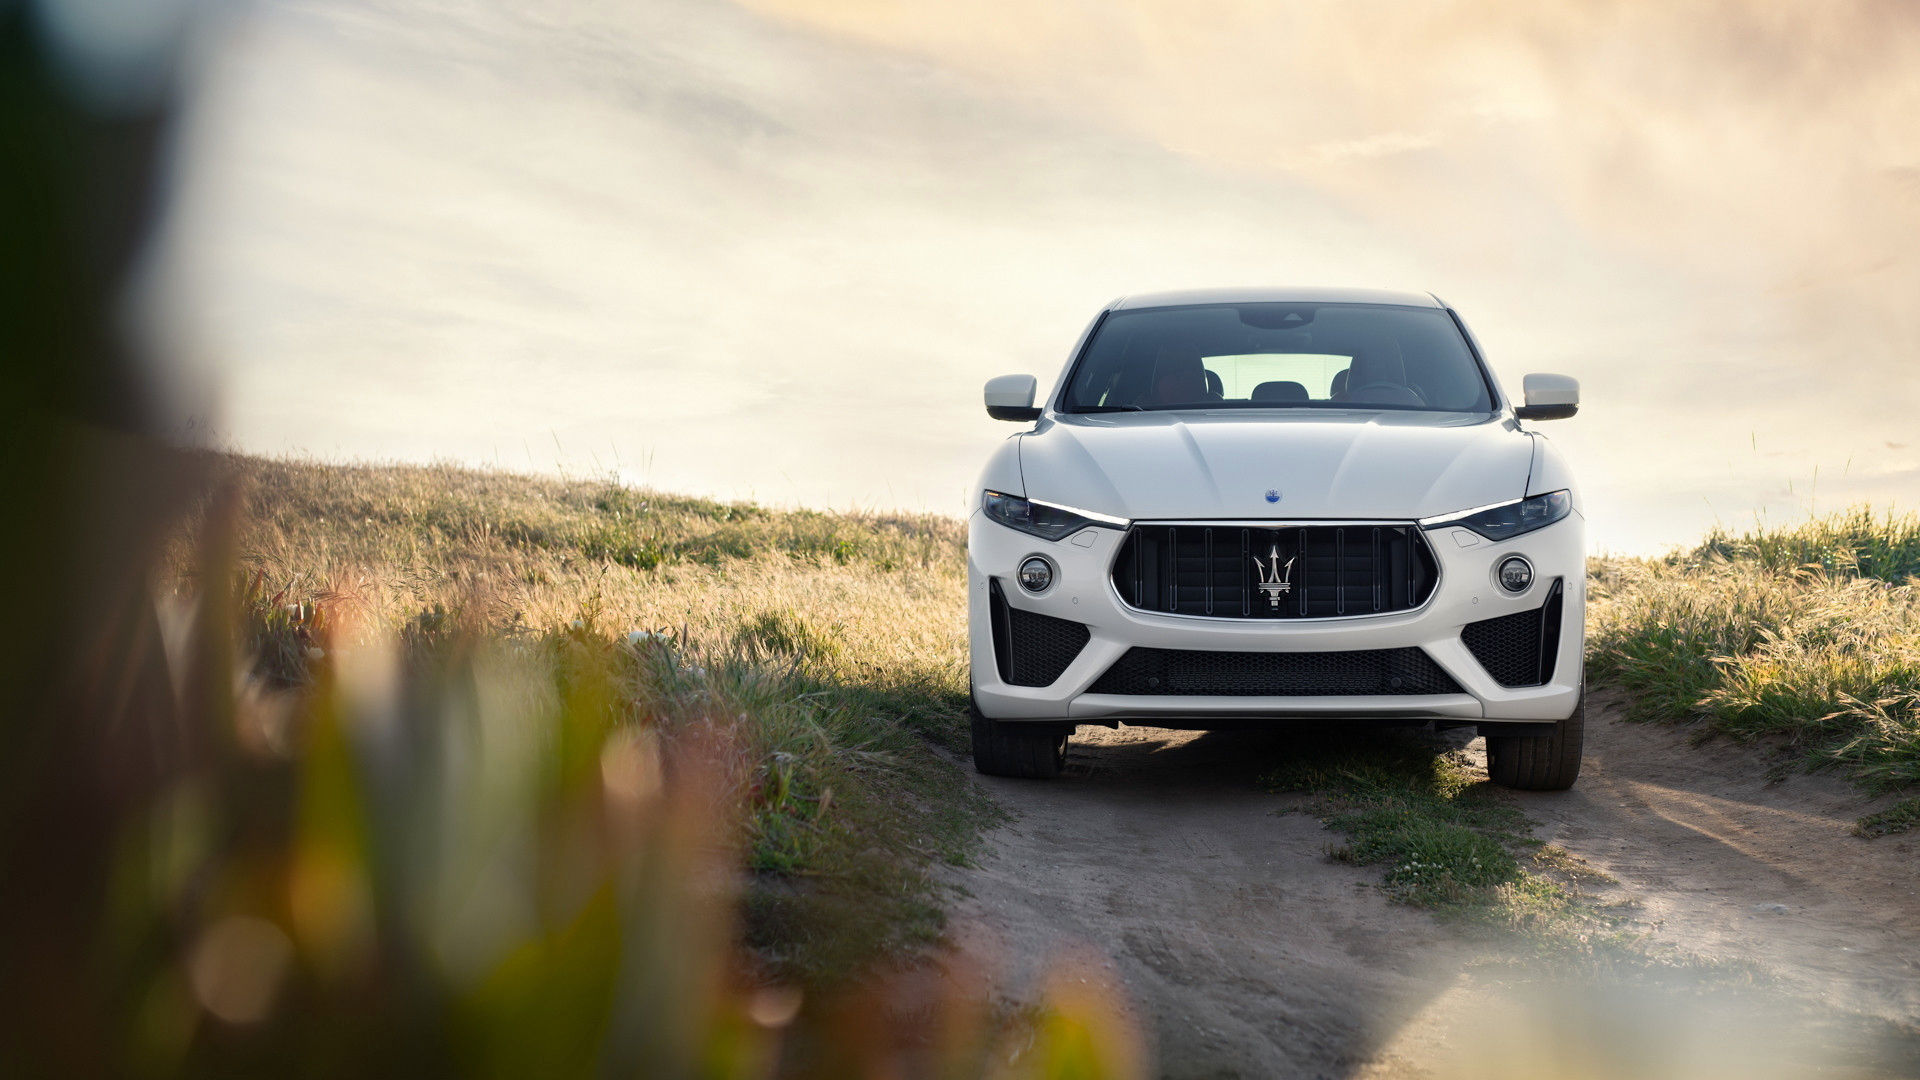 Front view of white Maserati Levante on a road in the middle of a field